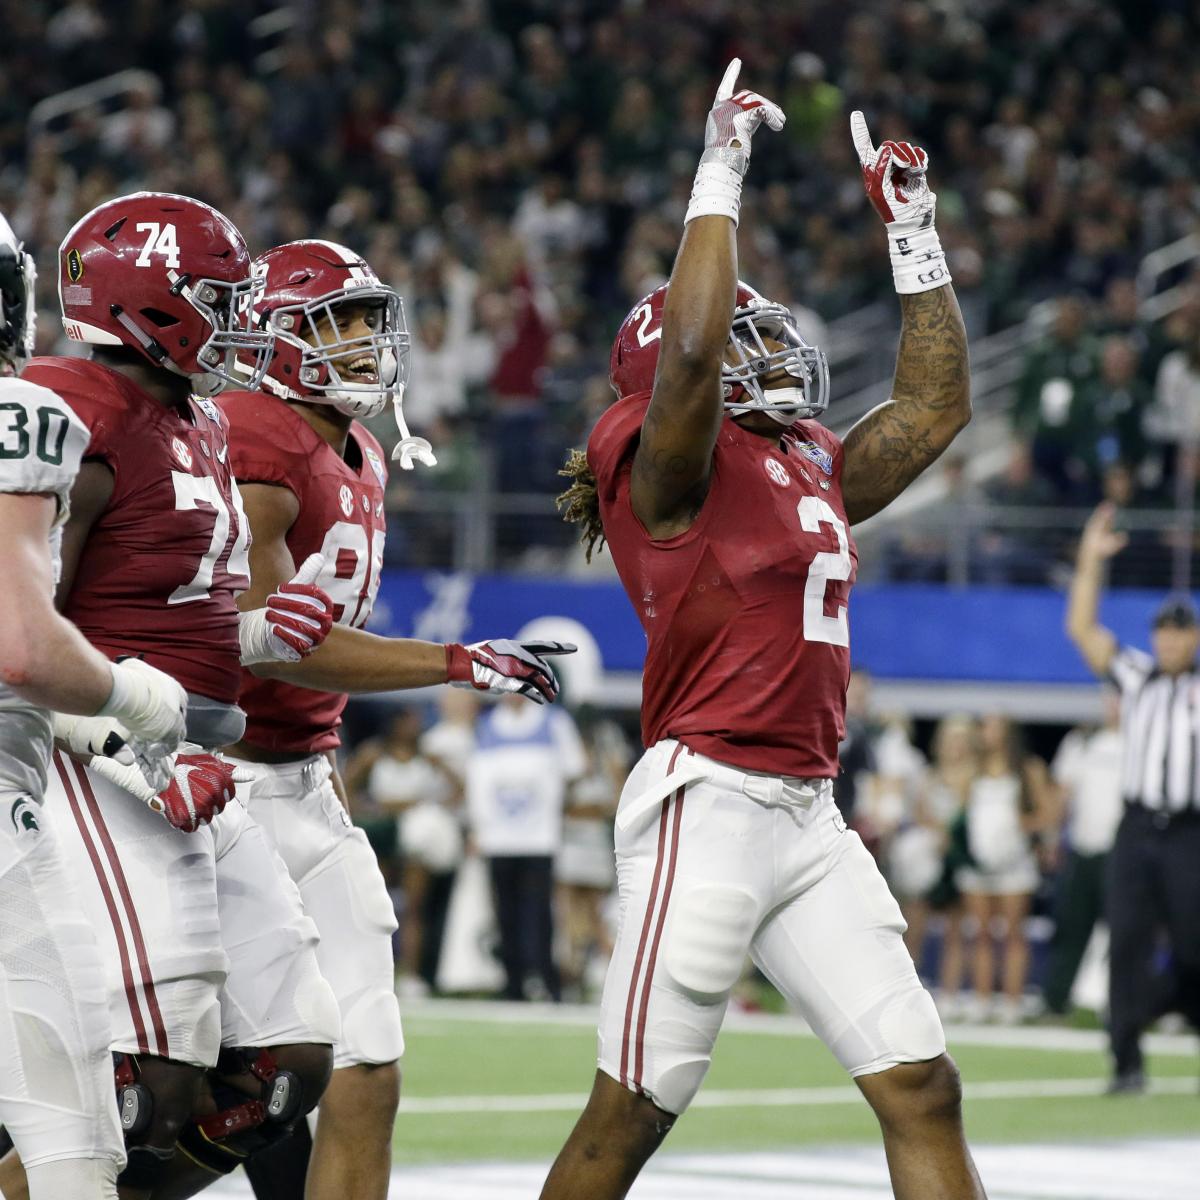 Derrick Henry Sets SEC Record for Most Rushing Touchdowns in Single